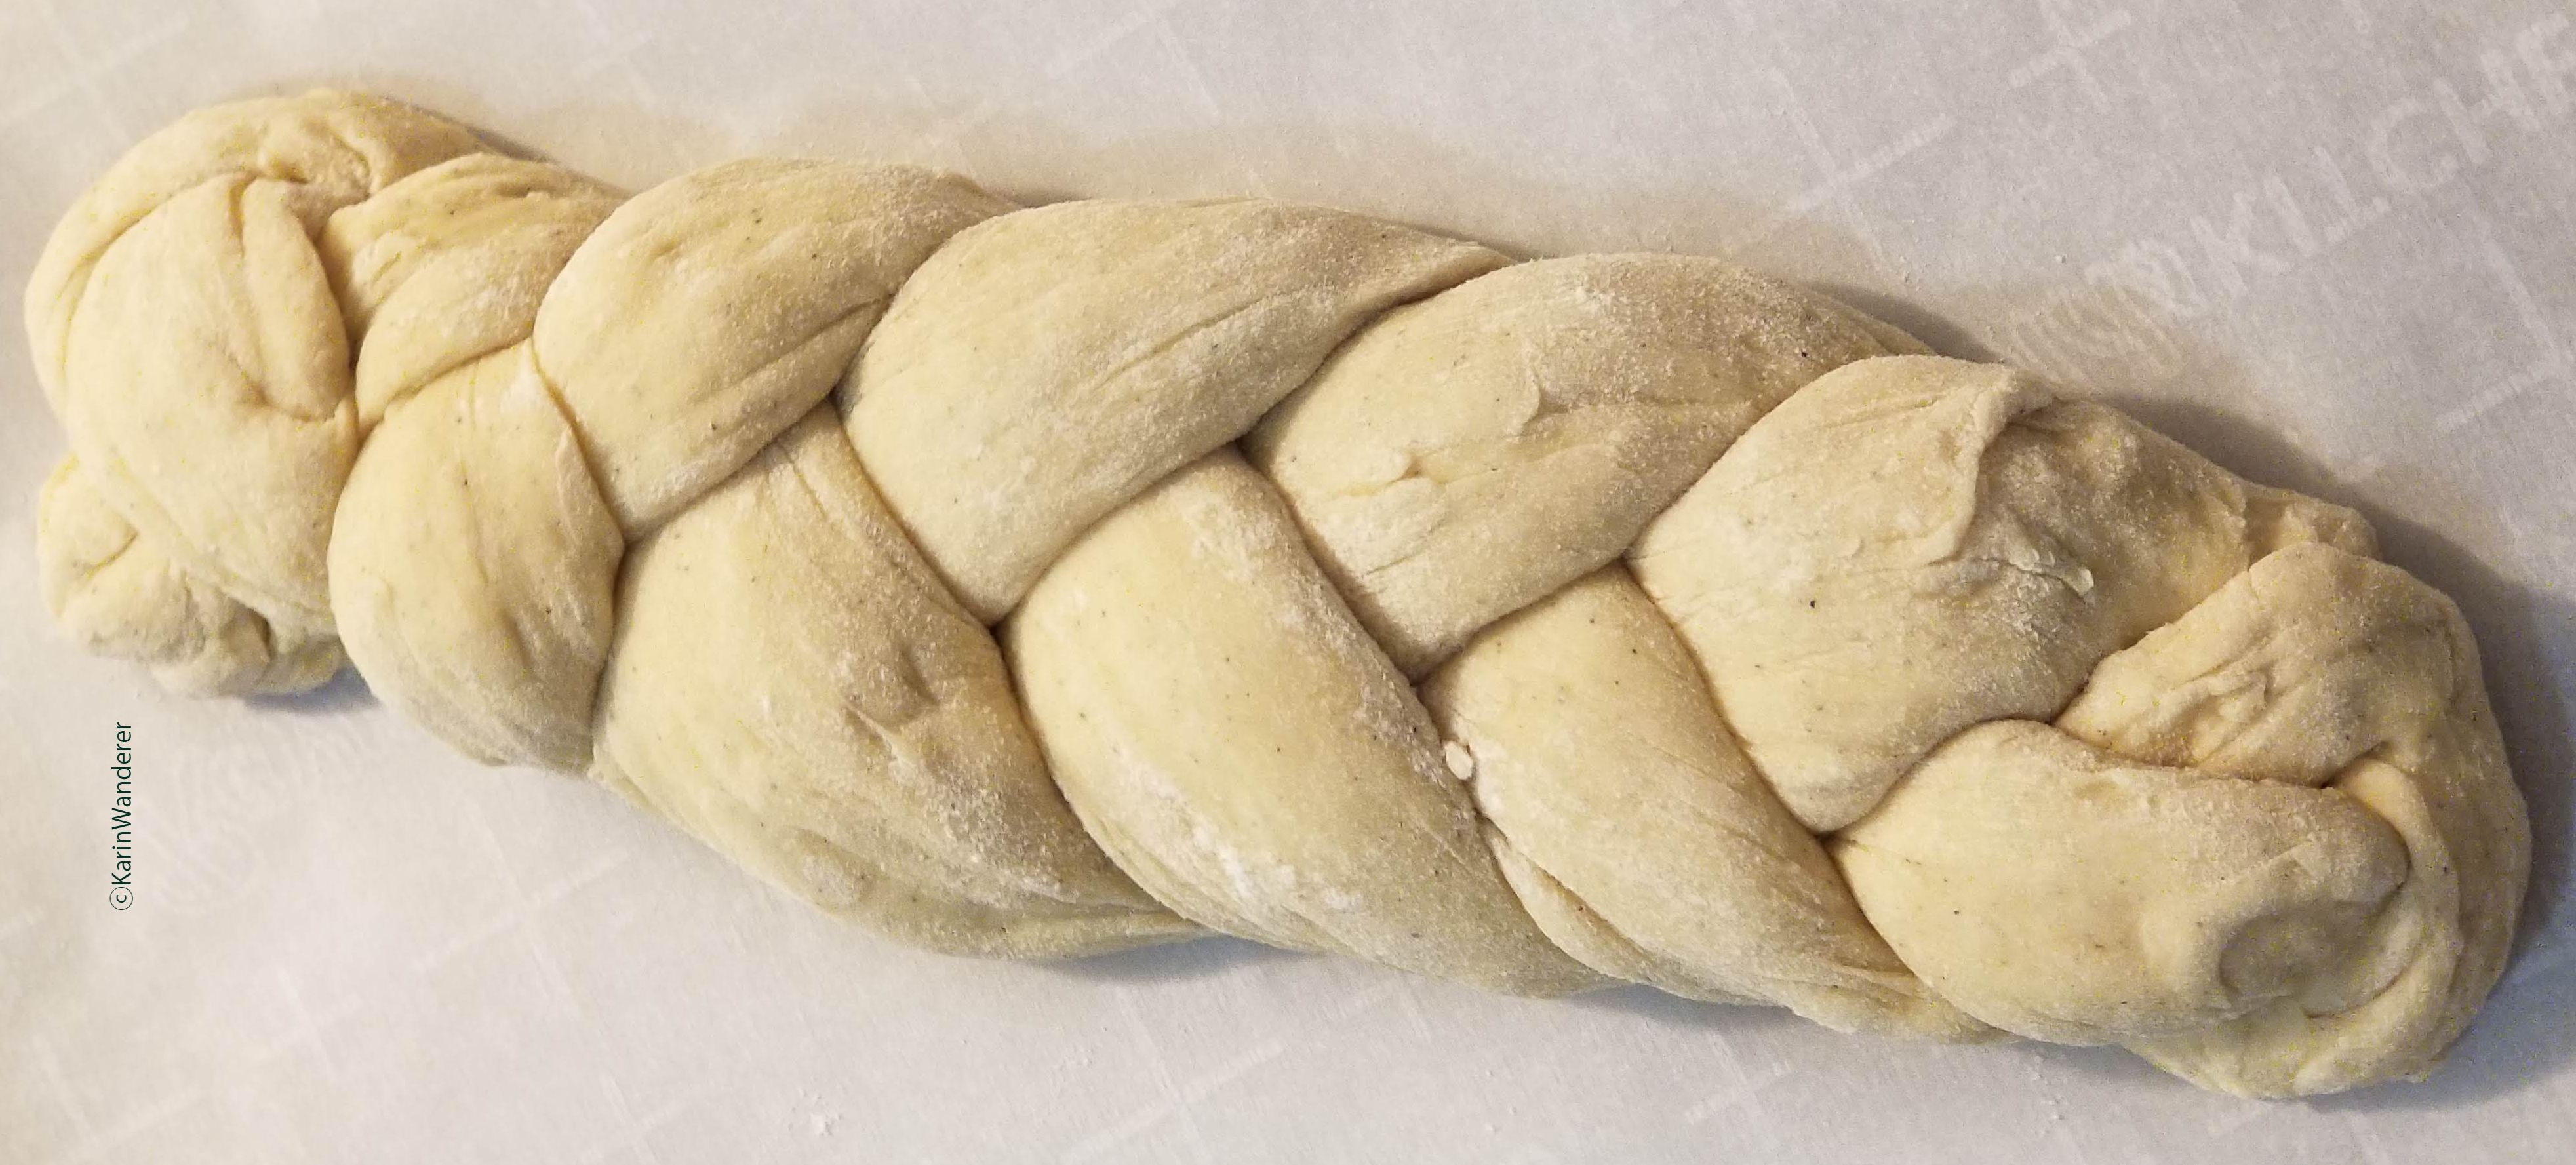 Unbaked braided loaf of bulle.